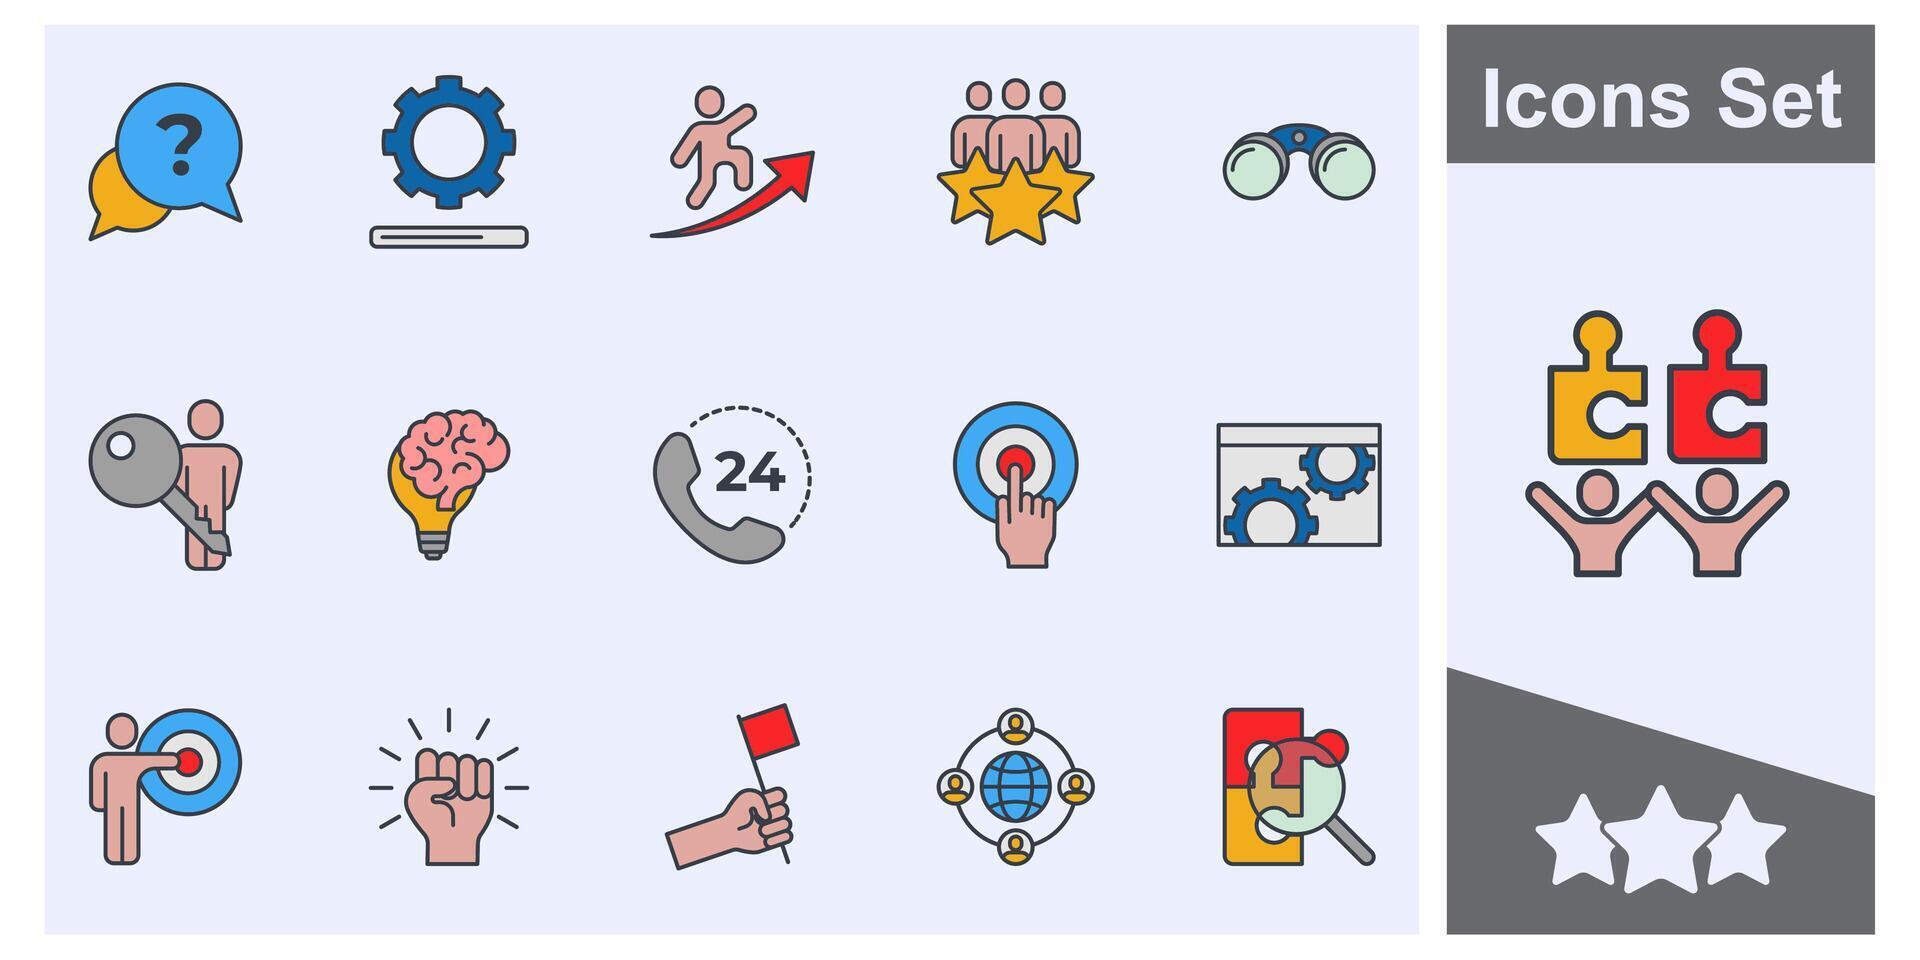 Business teamwork icon set symbol collection, logo isolated illustration vector